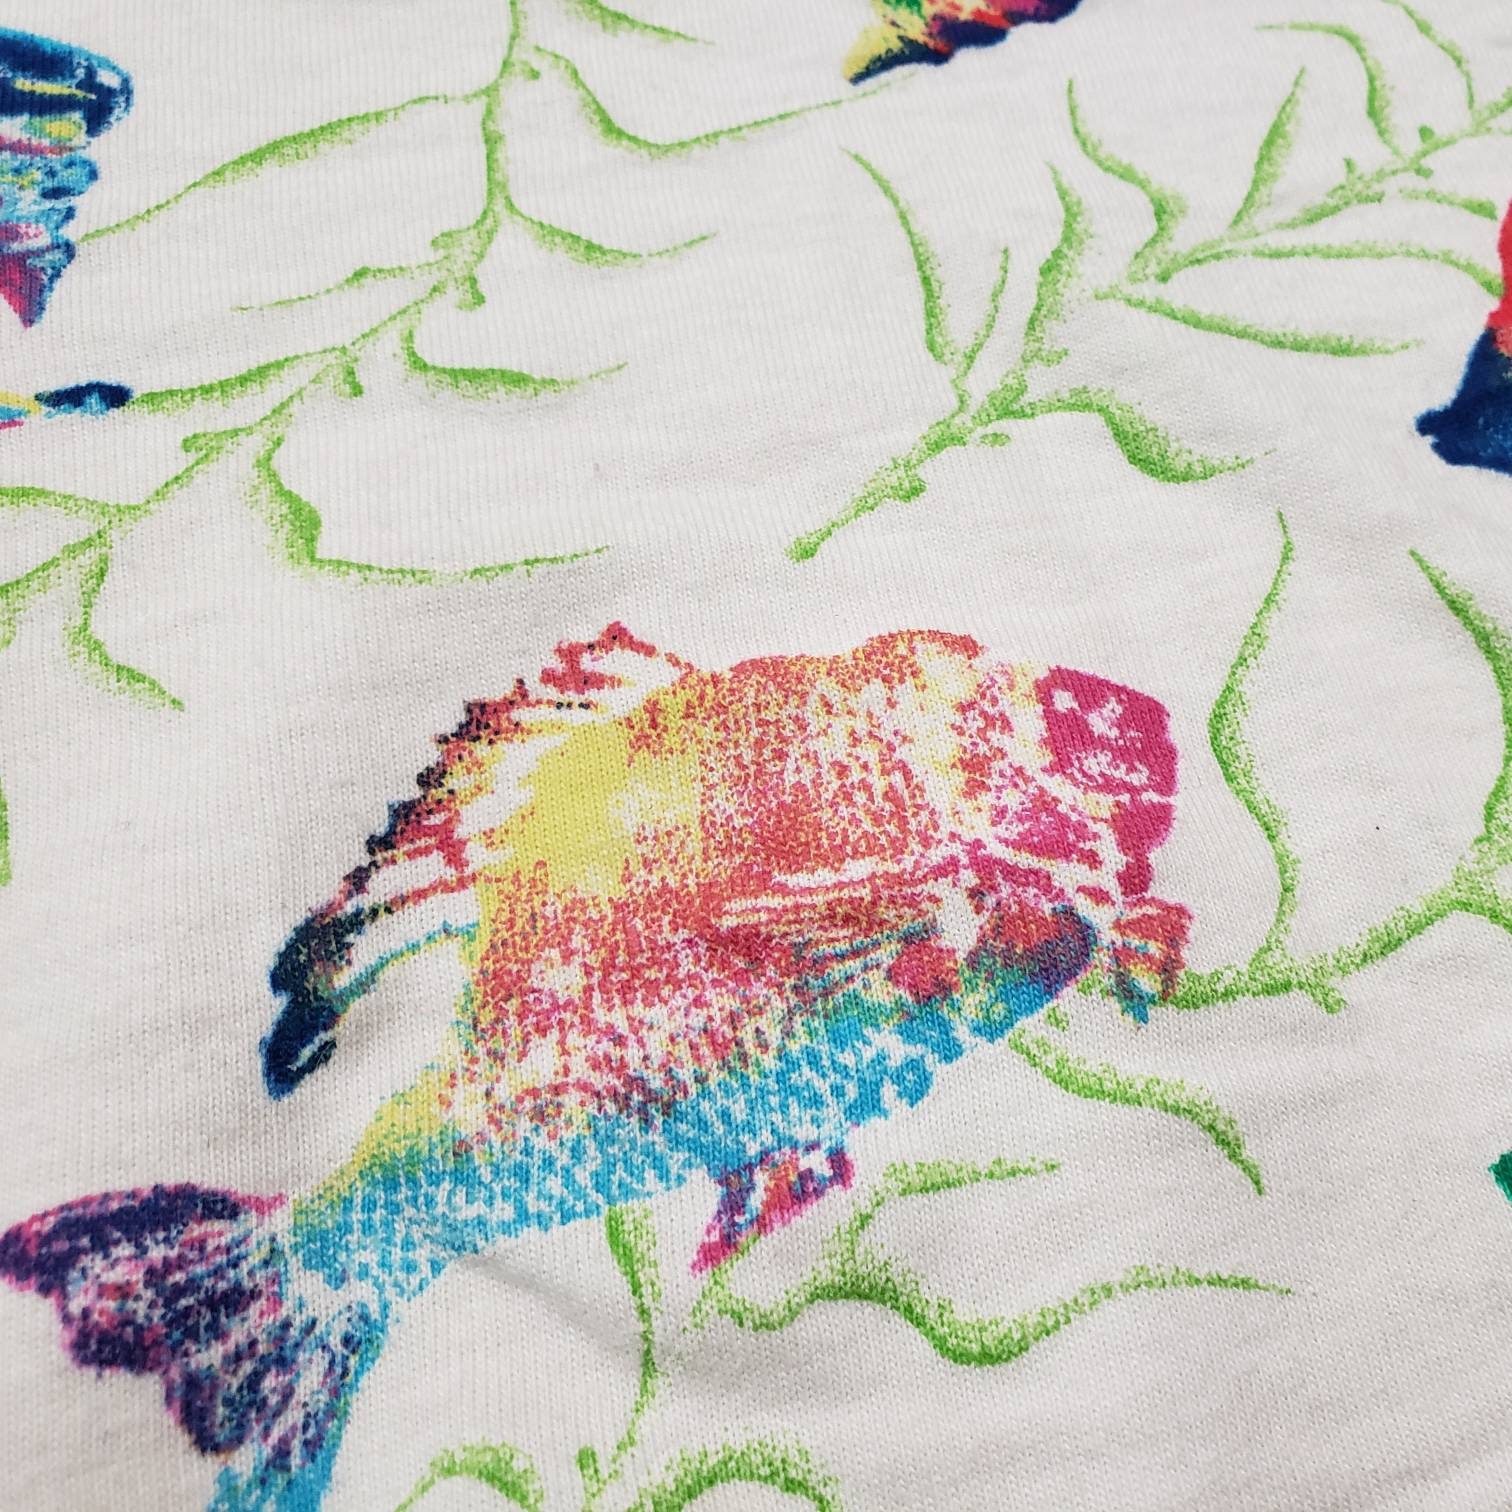 Colorful Fish and Plants Print on Cotton Jersey by the Yard - Etsy